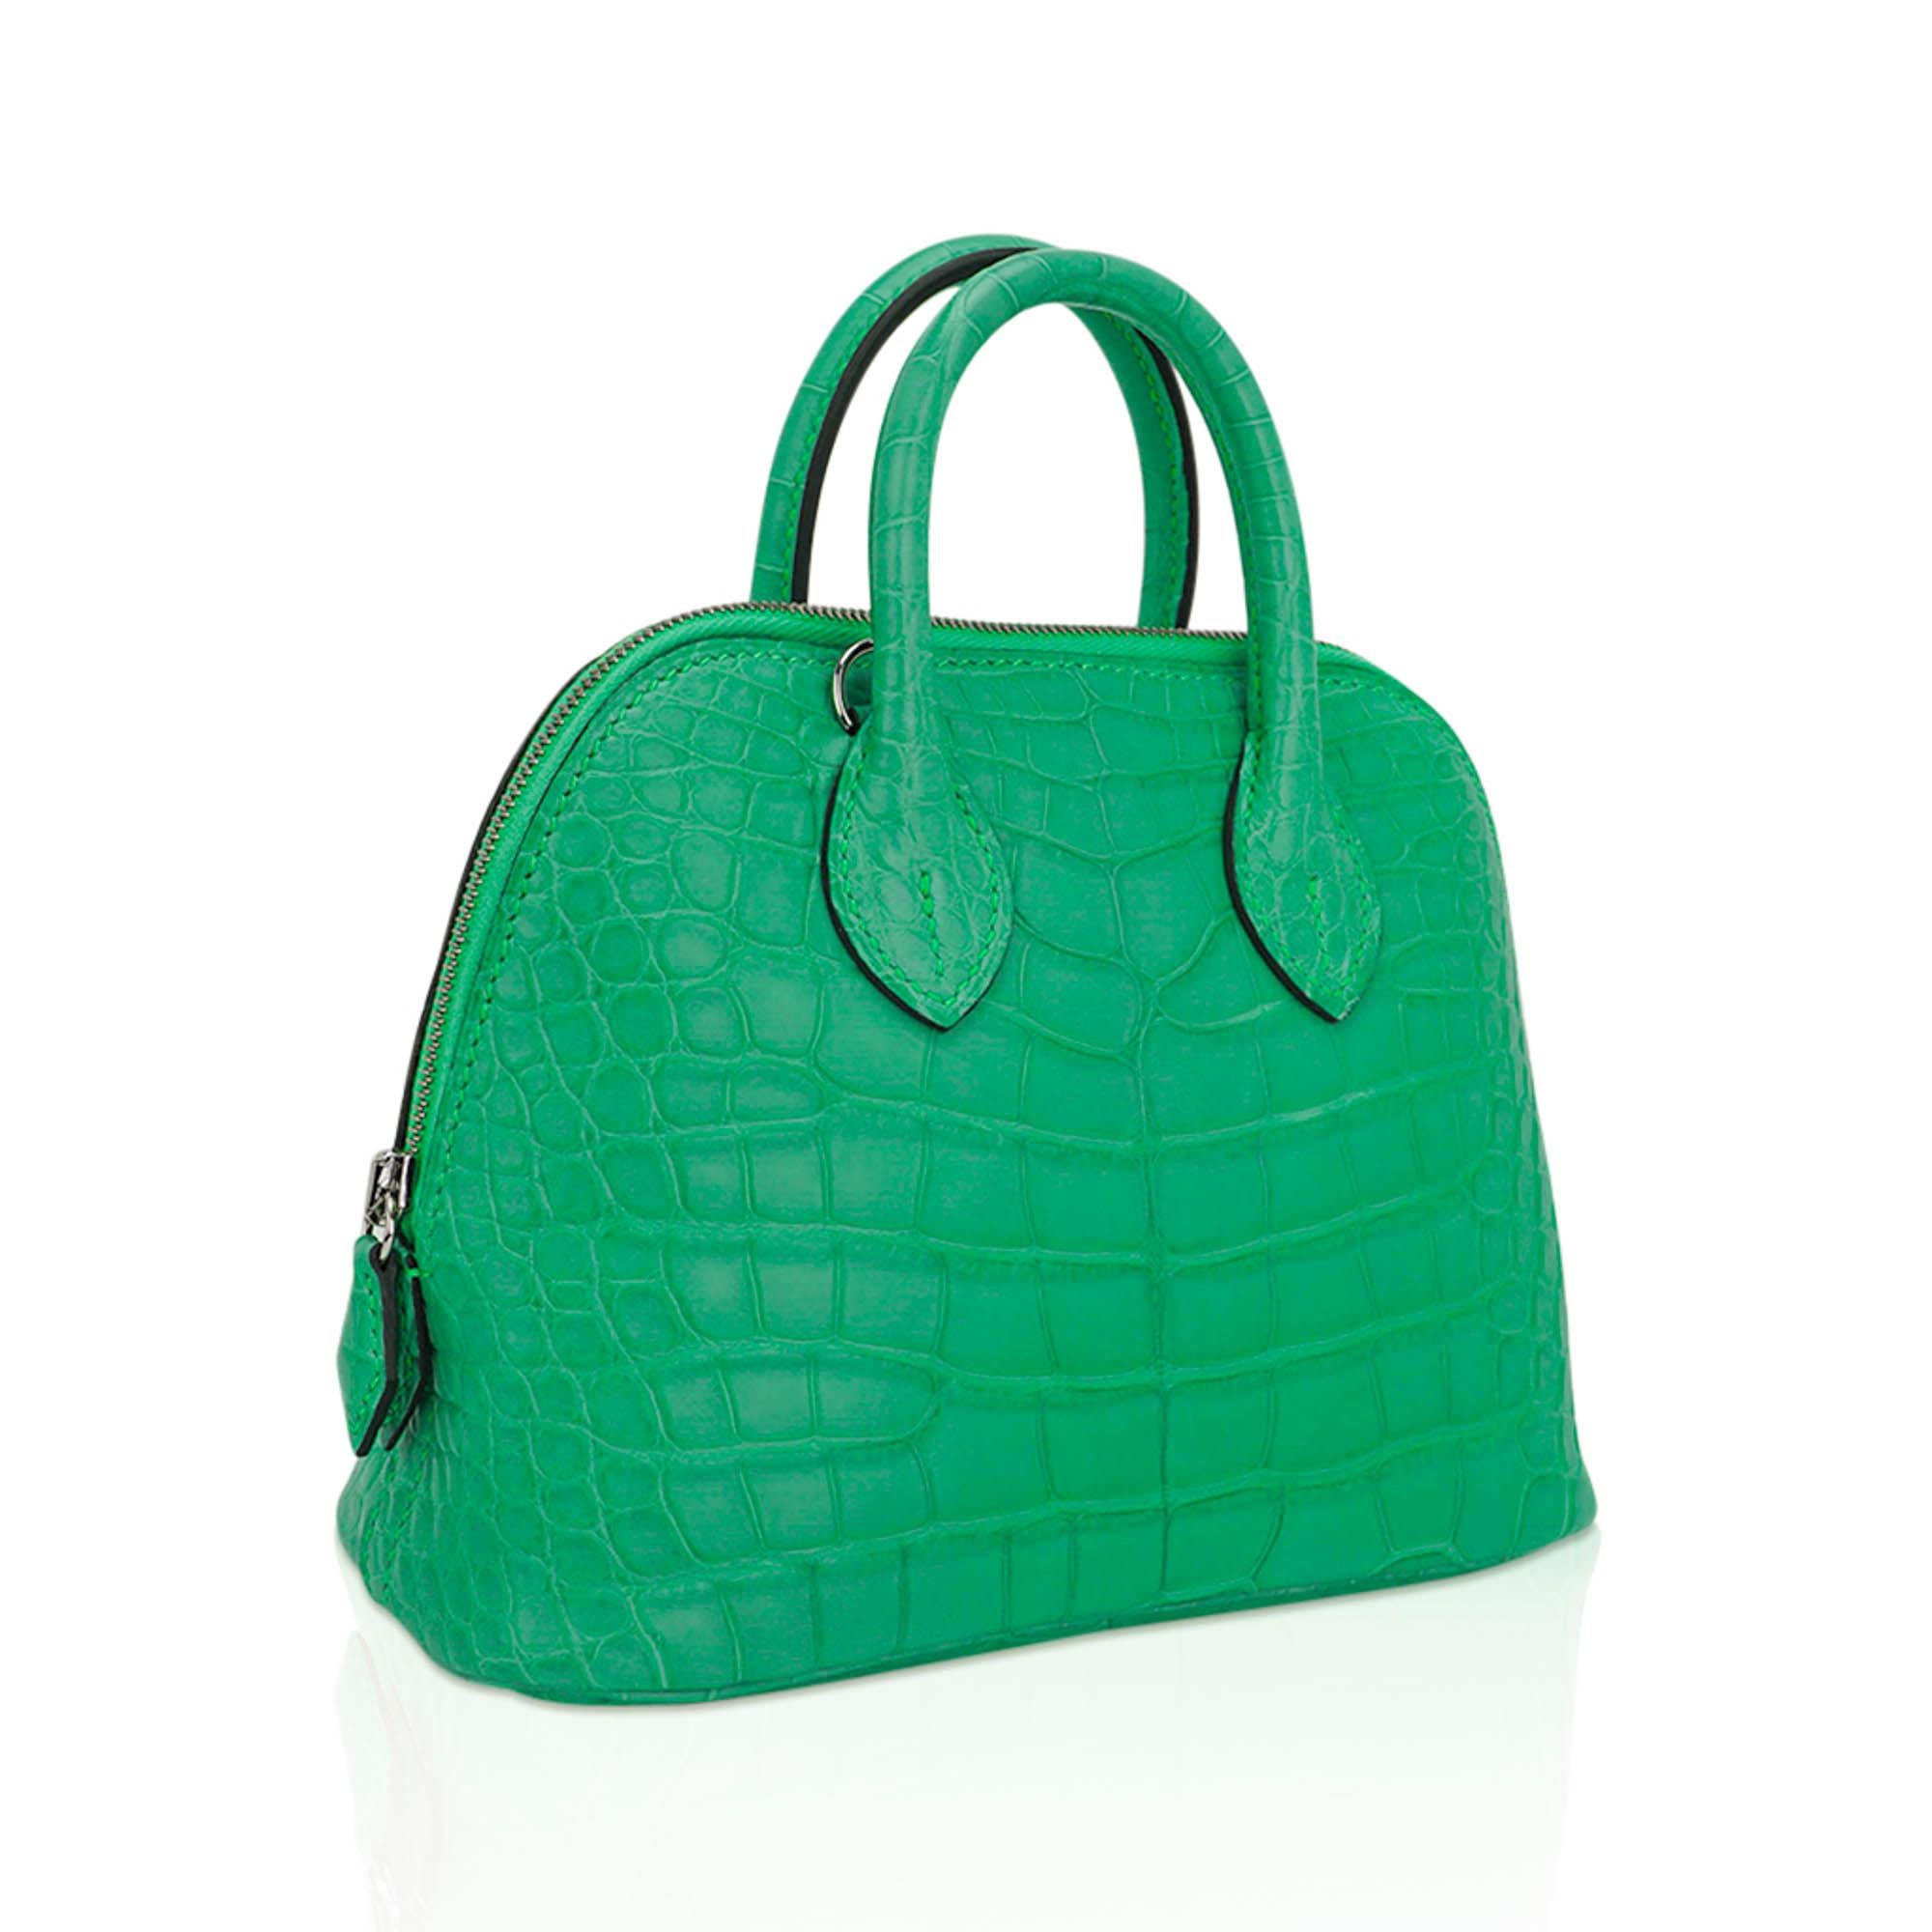 Mightychic offers an Hermes Mini Bolide 1923 featured in striking Vert Comics matte Alligator. 
Charming 'baby' Bolide is a fabulous day to evening treasure.
Fresh and crisp with Palladium hardware.
Comes with detachable strap and sleepers.
Interior